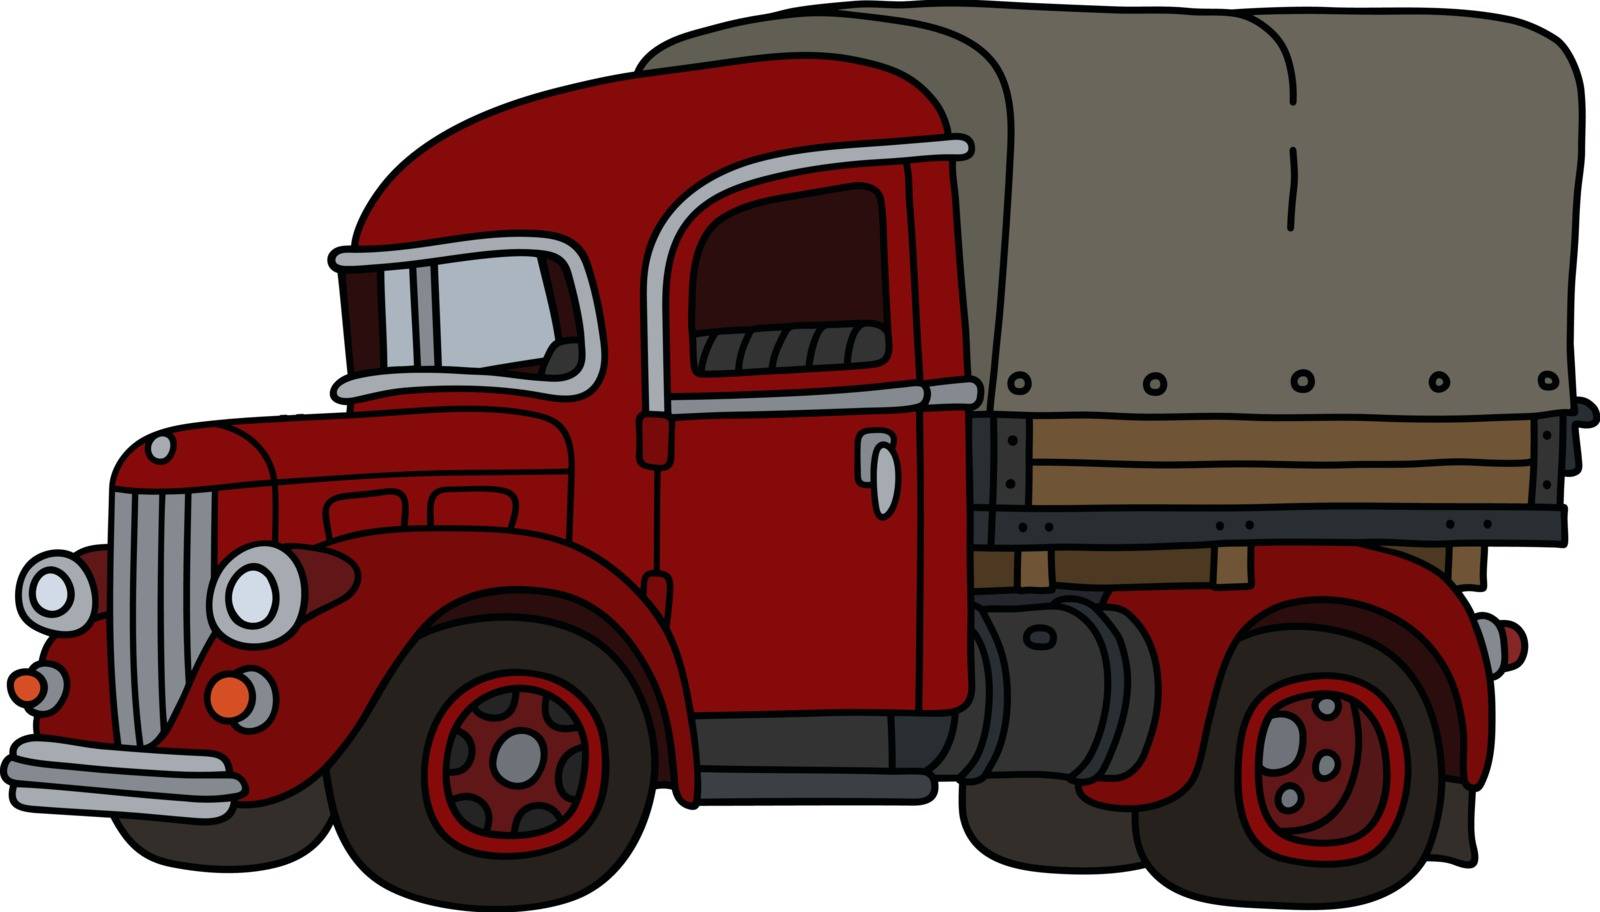 The vectorized hand drawing of a vintage red delivery truck